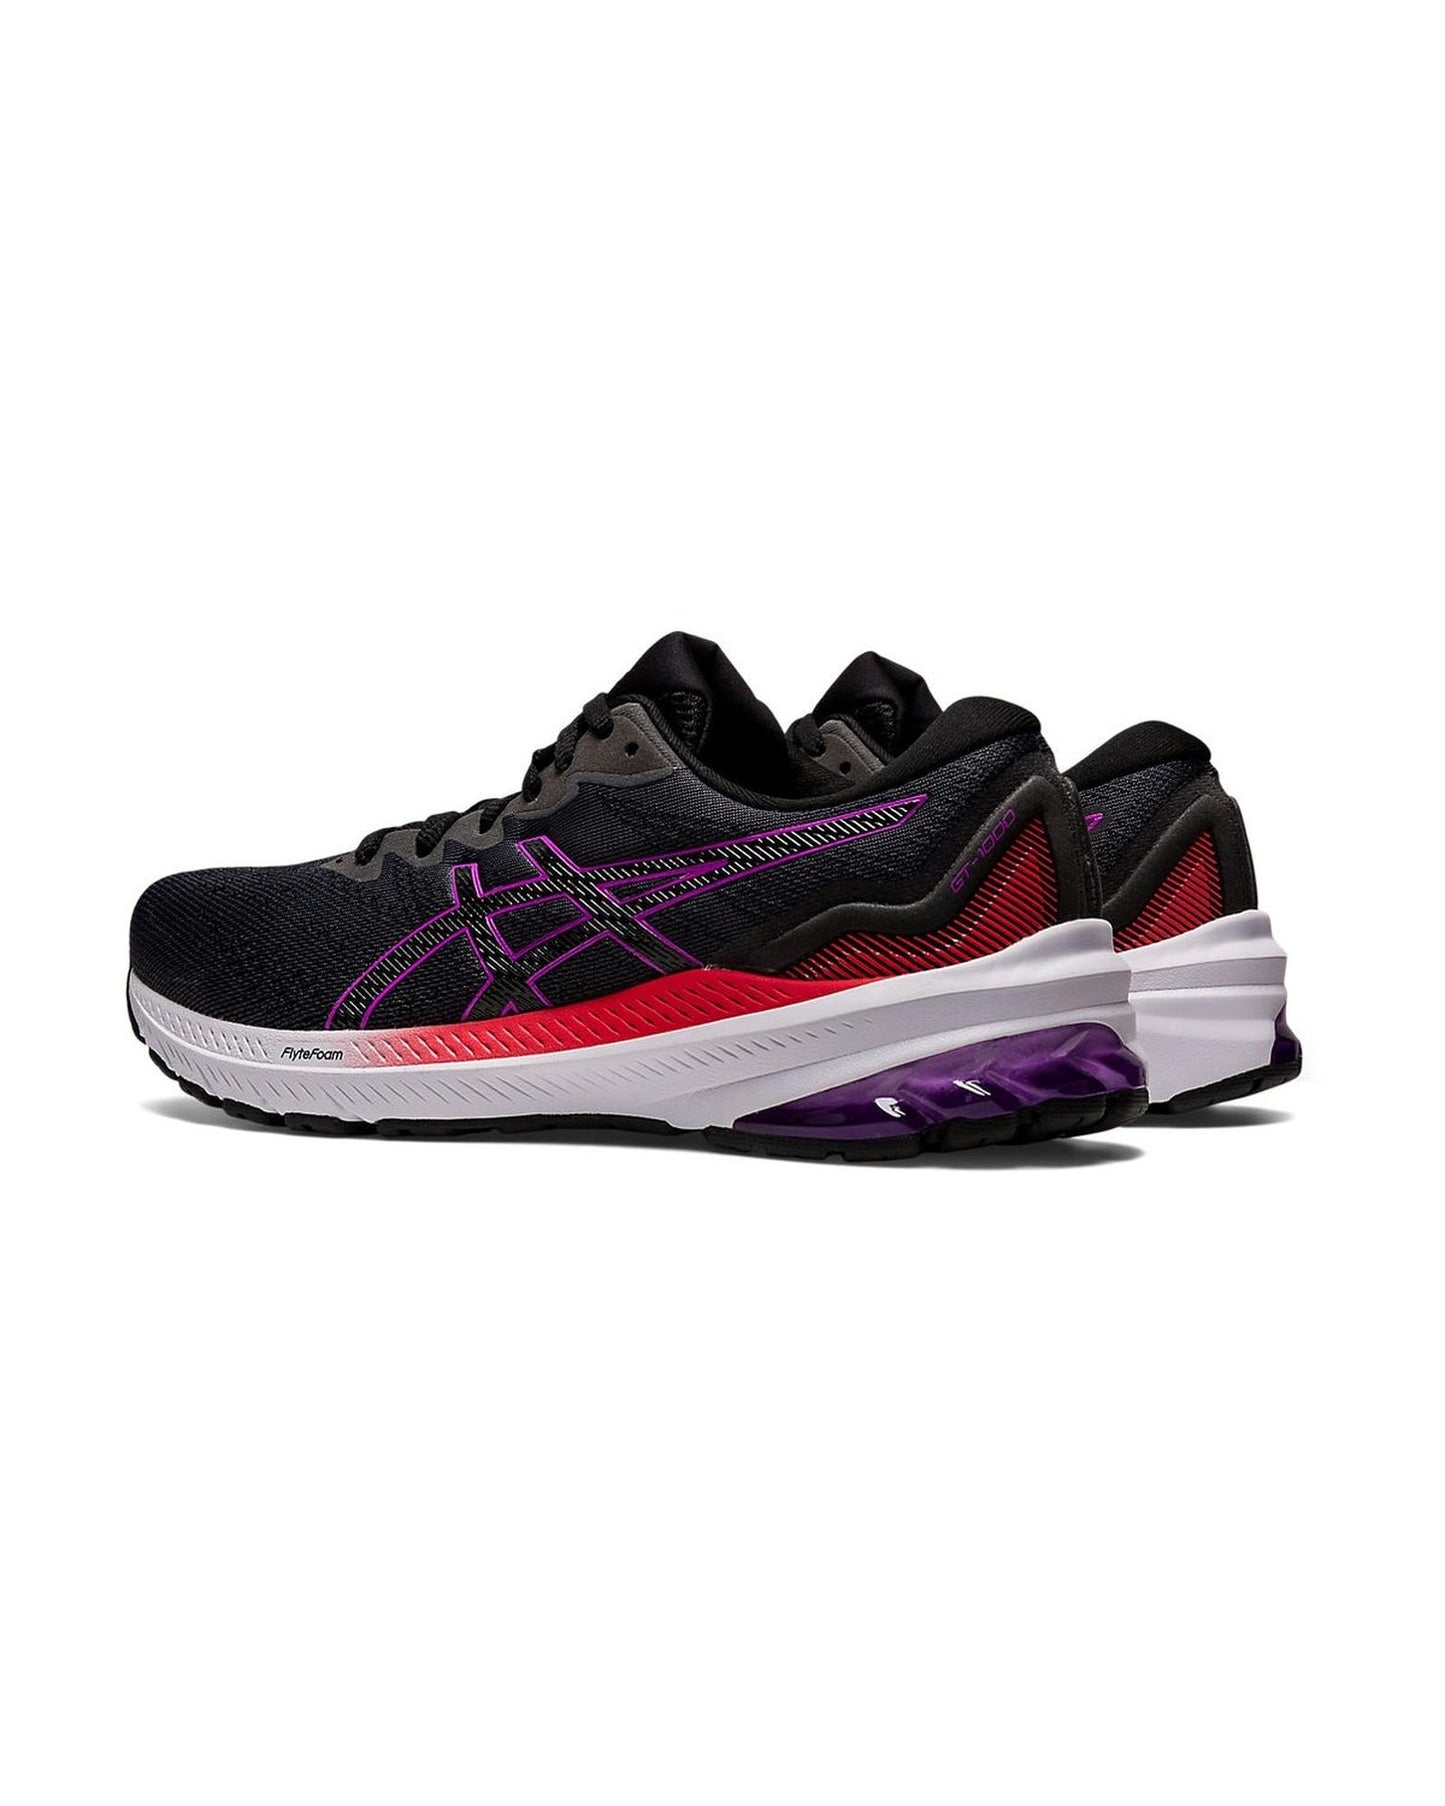 Breathable Cushioned Running Shoes with Improved Support - 6.5 US